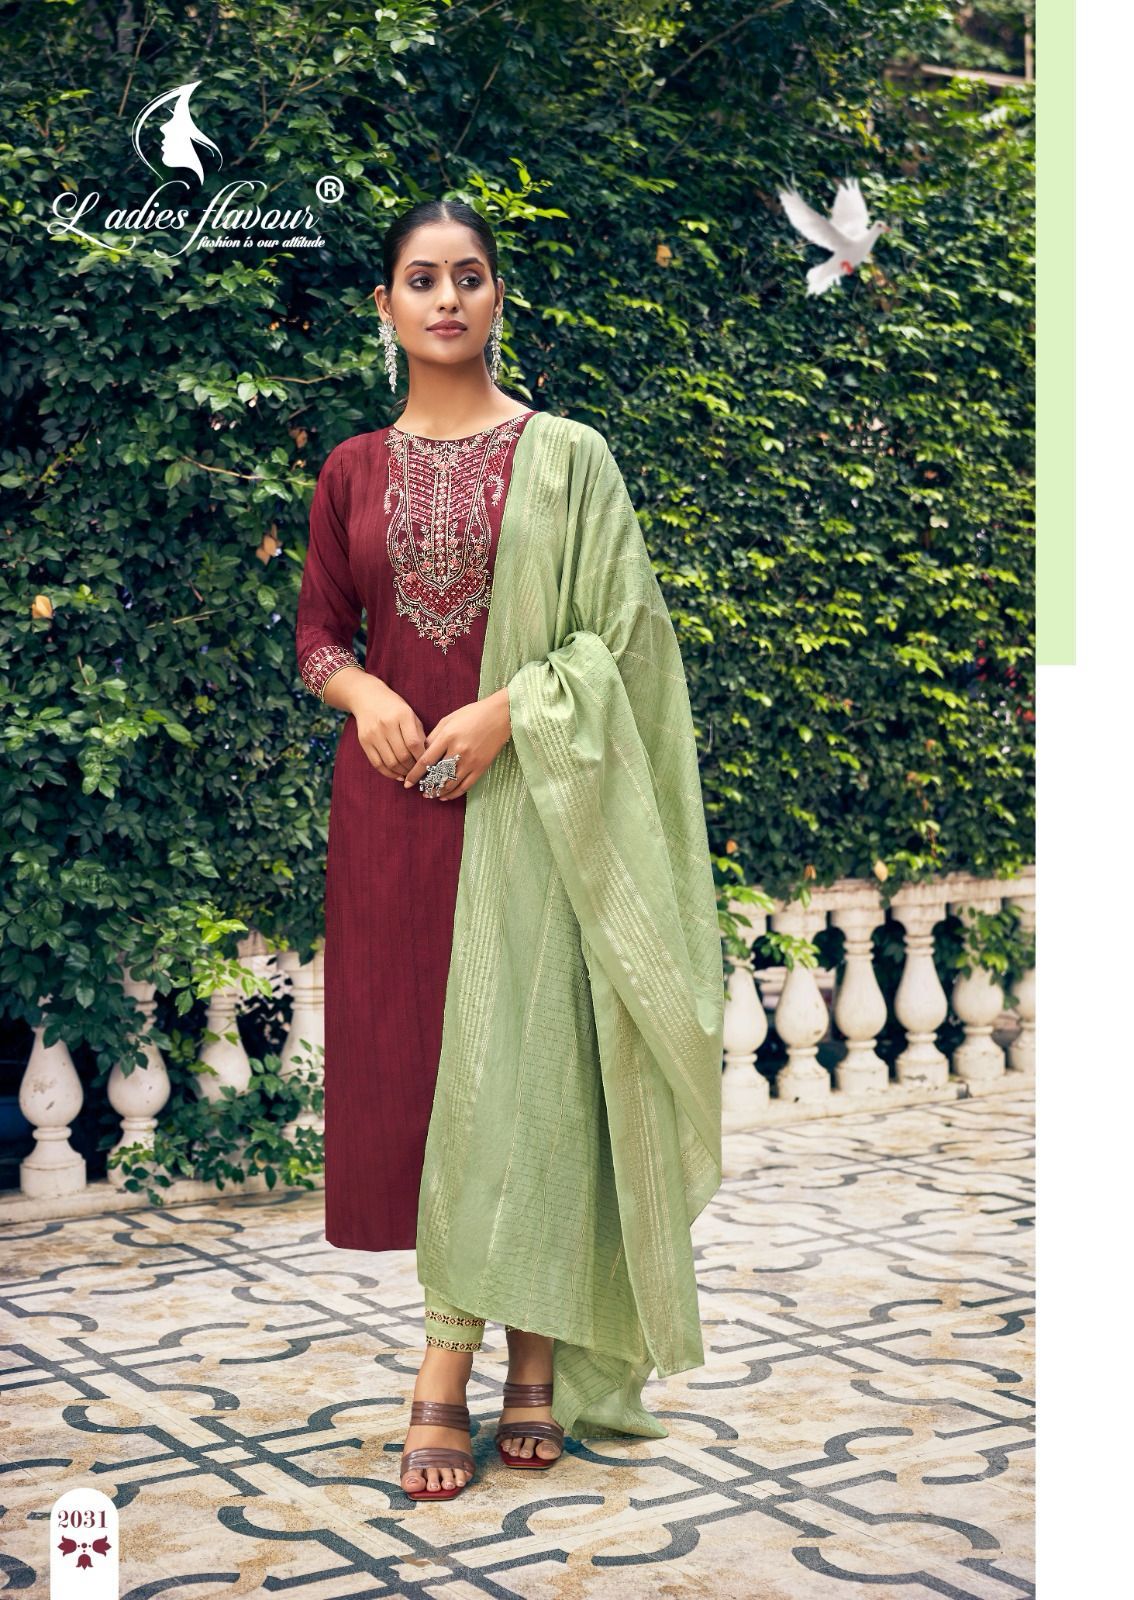 Parampara Vol 2 Ladies Flavour Chinon Readymade Pant Style Suits